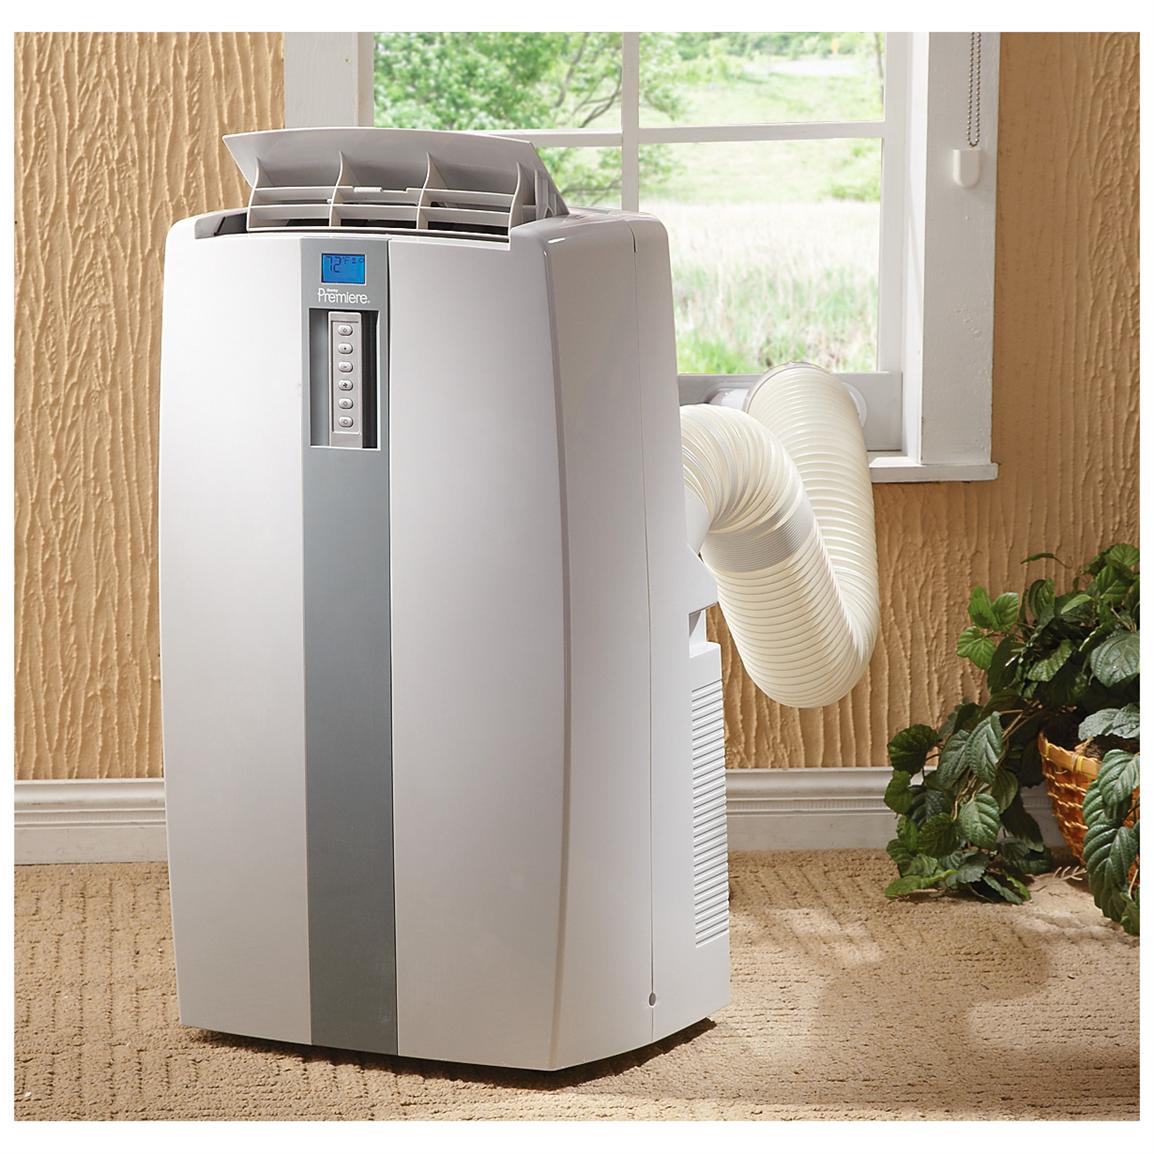 Installing A Portable Air Conditioner In 8 Easy Steps